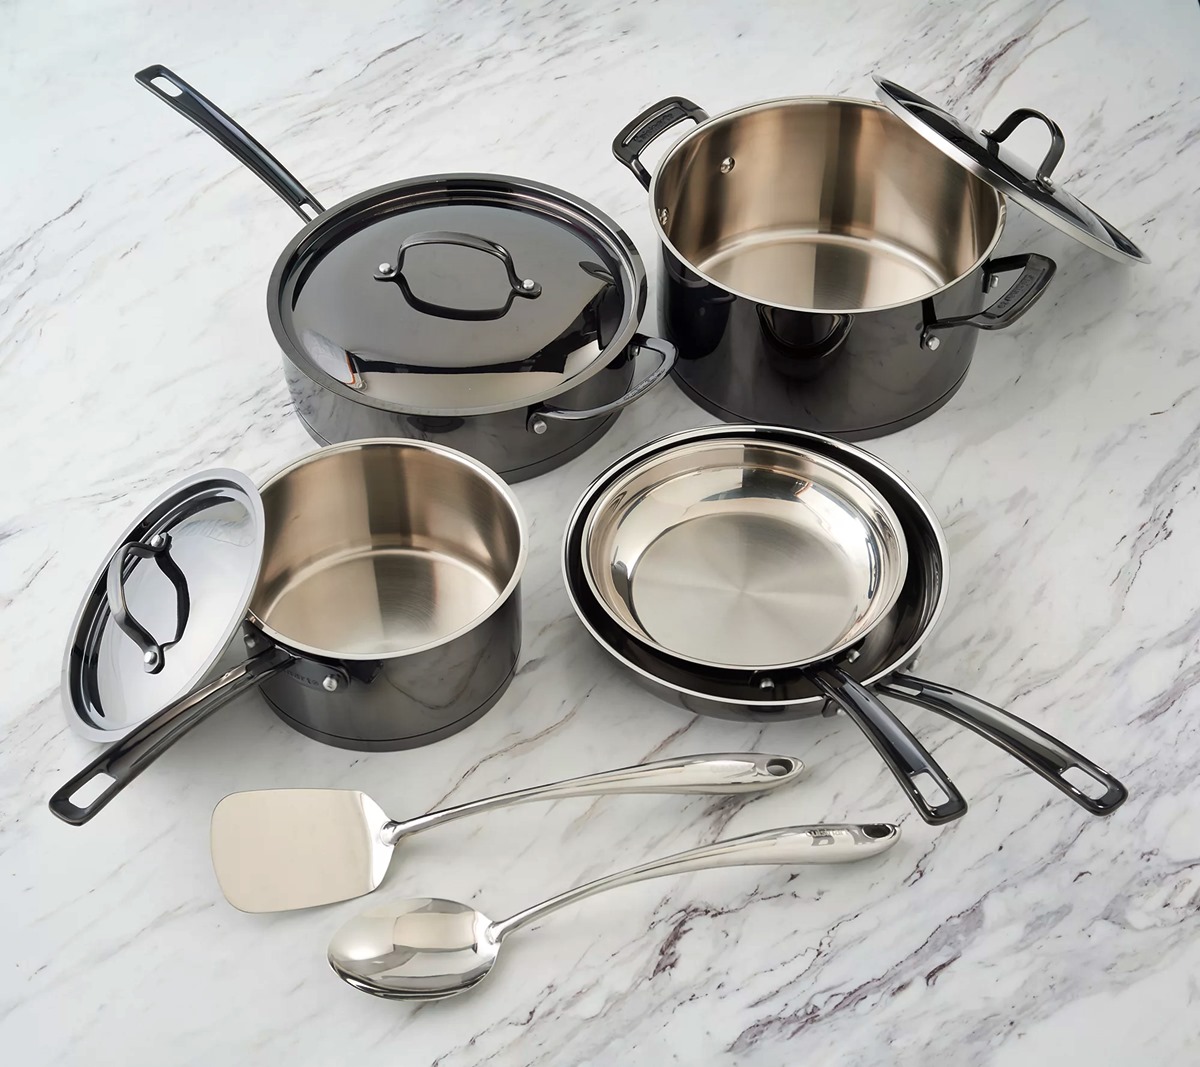 13 Incredible Magnalite Cookware for 2023